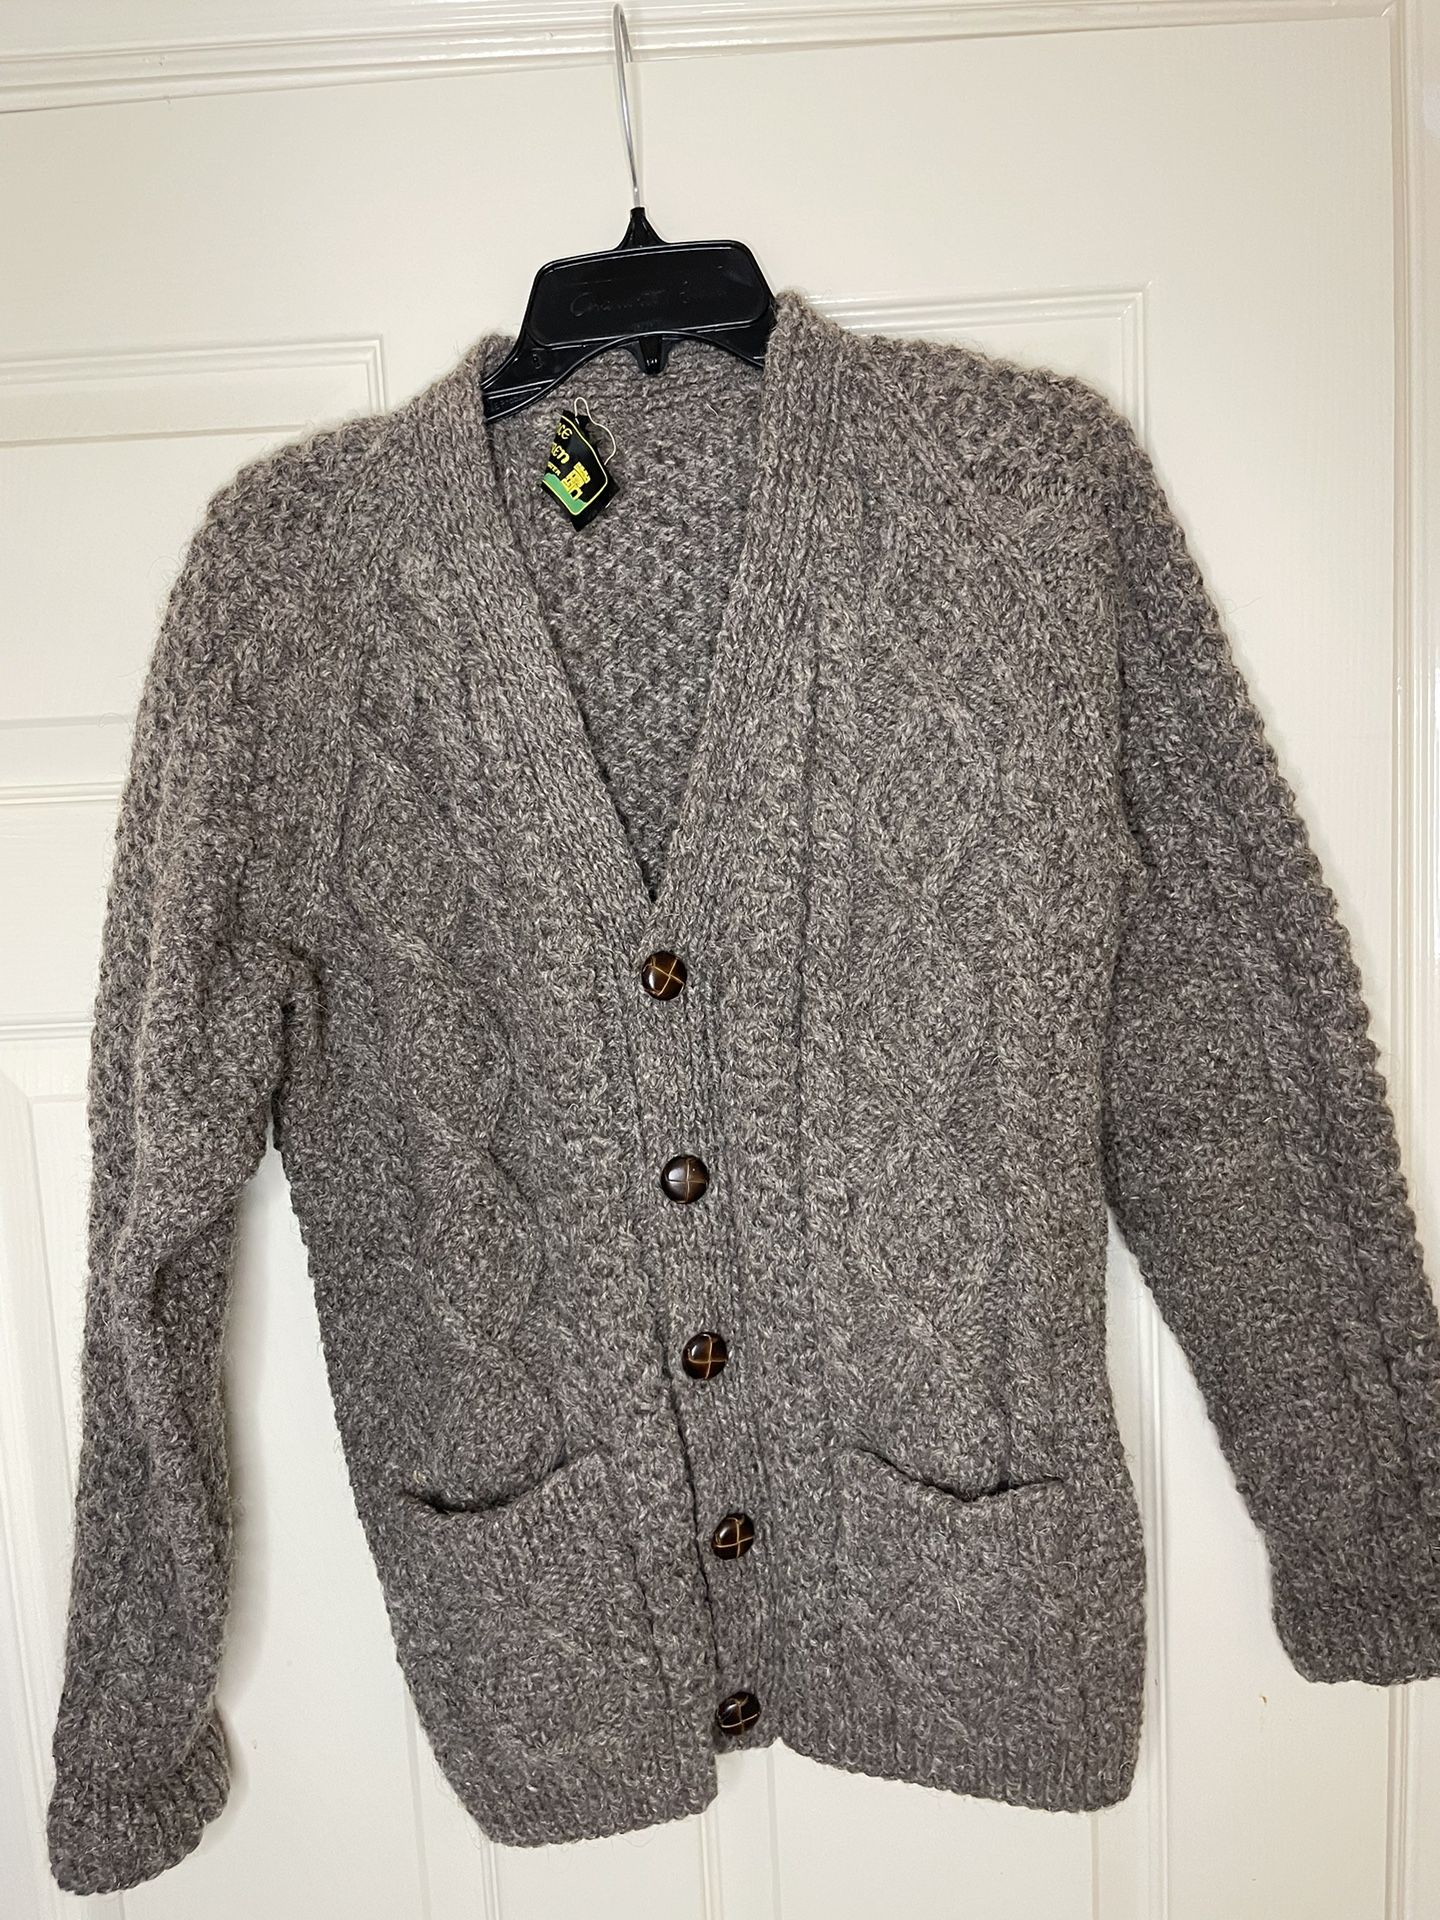  Prince of Burren Knitted Cardigan Sweater Size M.  